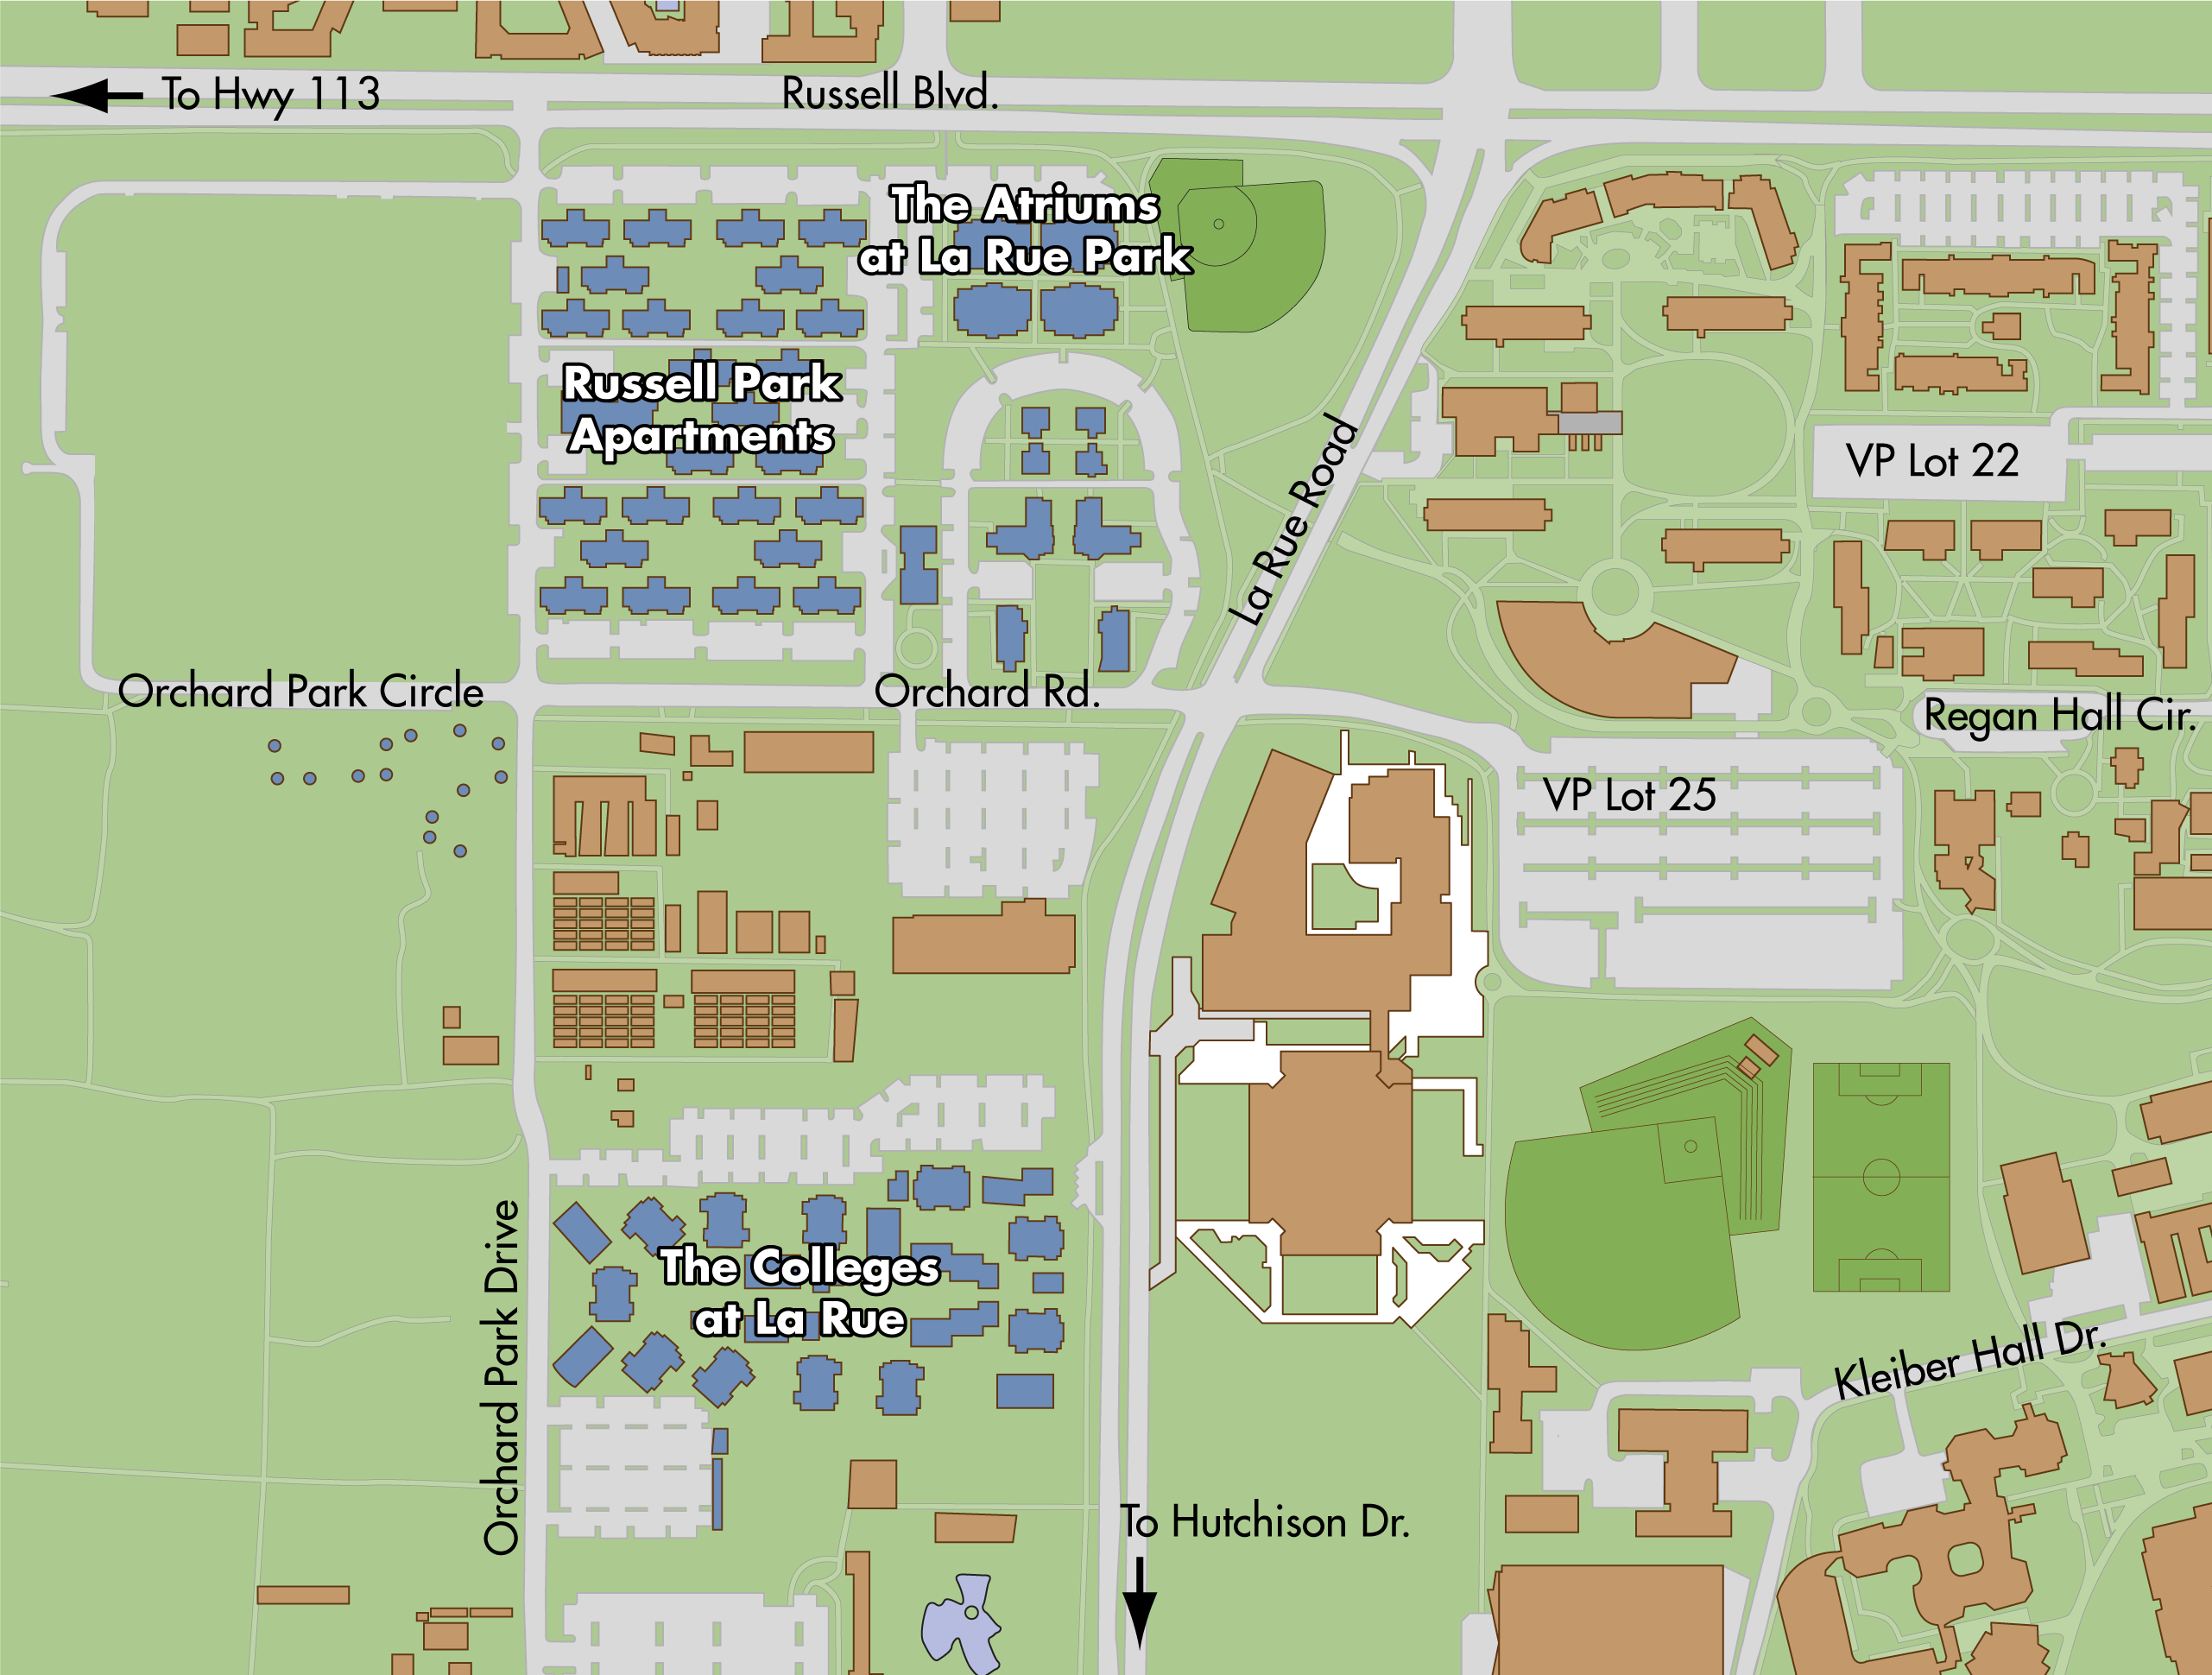 shds-uc-davis-student-housing-and-dining-services